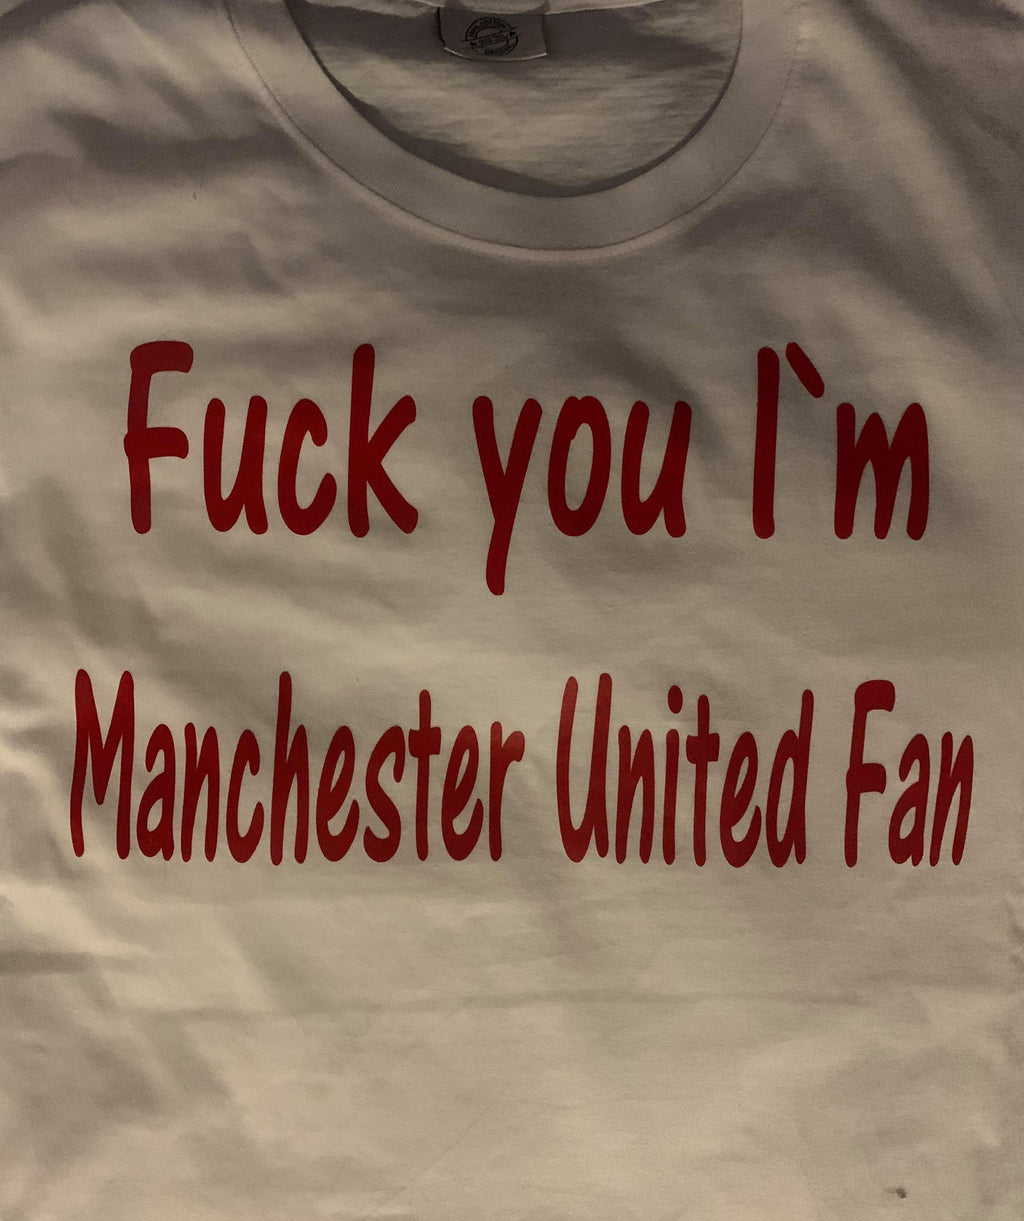 Fuck you i’m Manchester United Fan